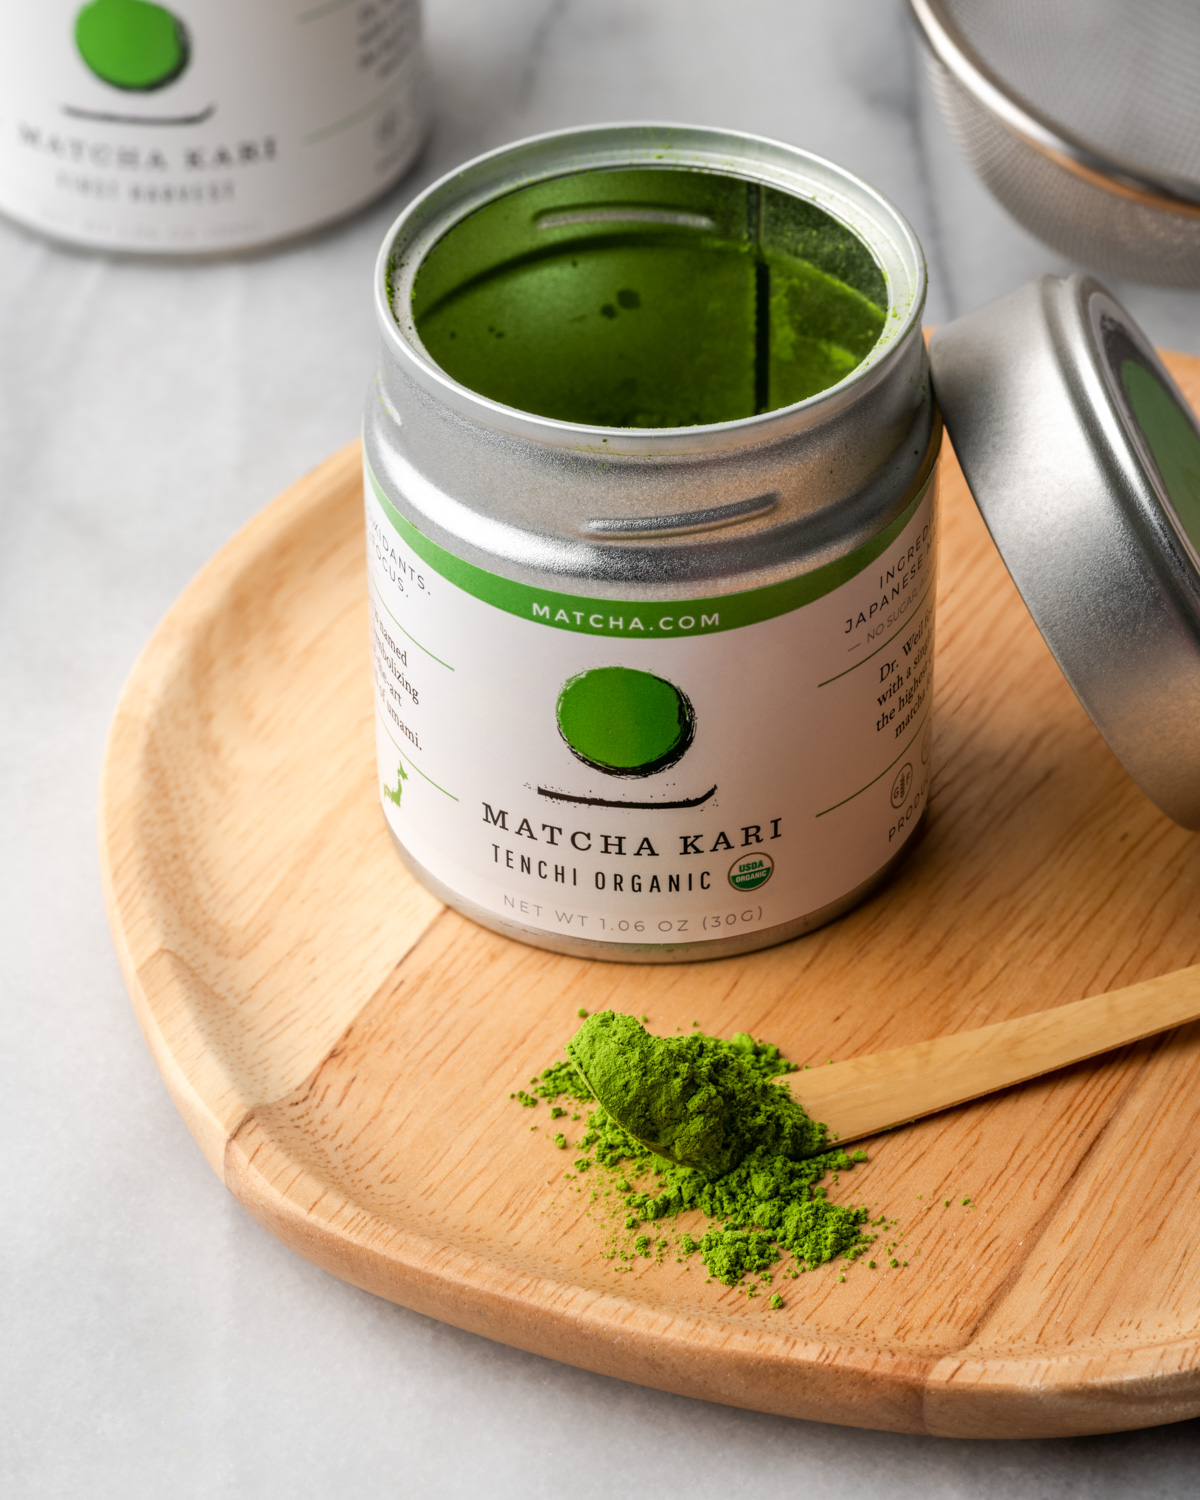 A can of matcha green tea powder on a wooden plate.